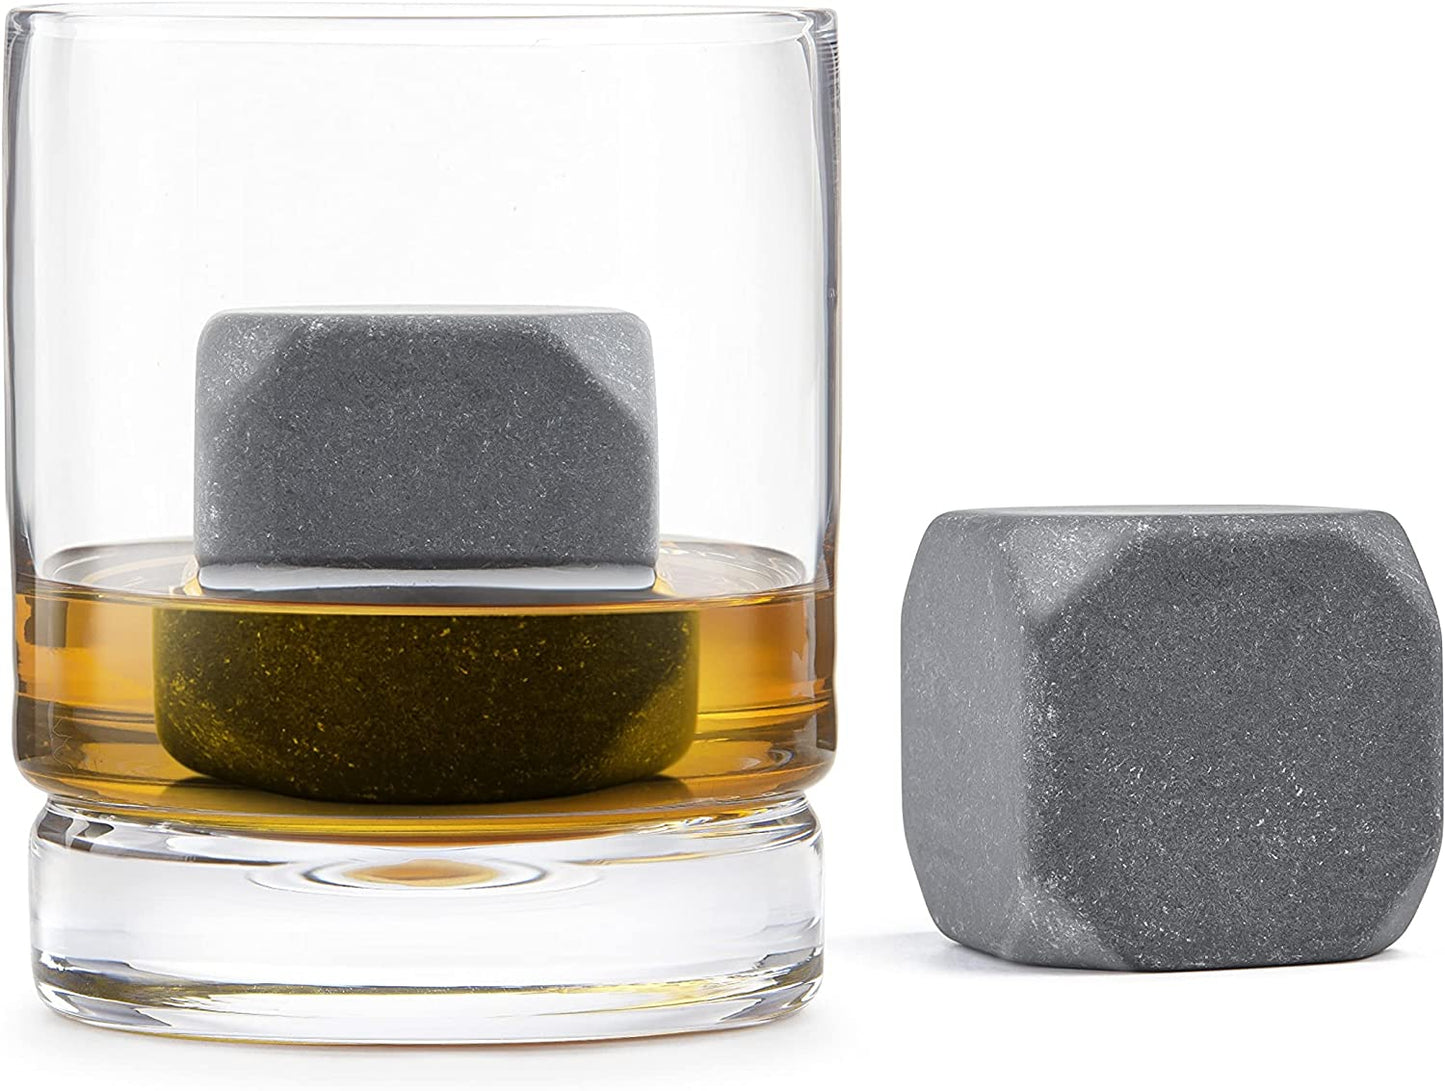 one sculpted chilling stone in a glass with liquid and one sitting beside it on a white background